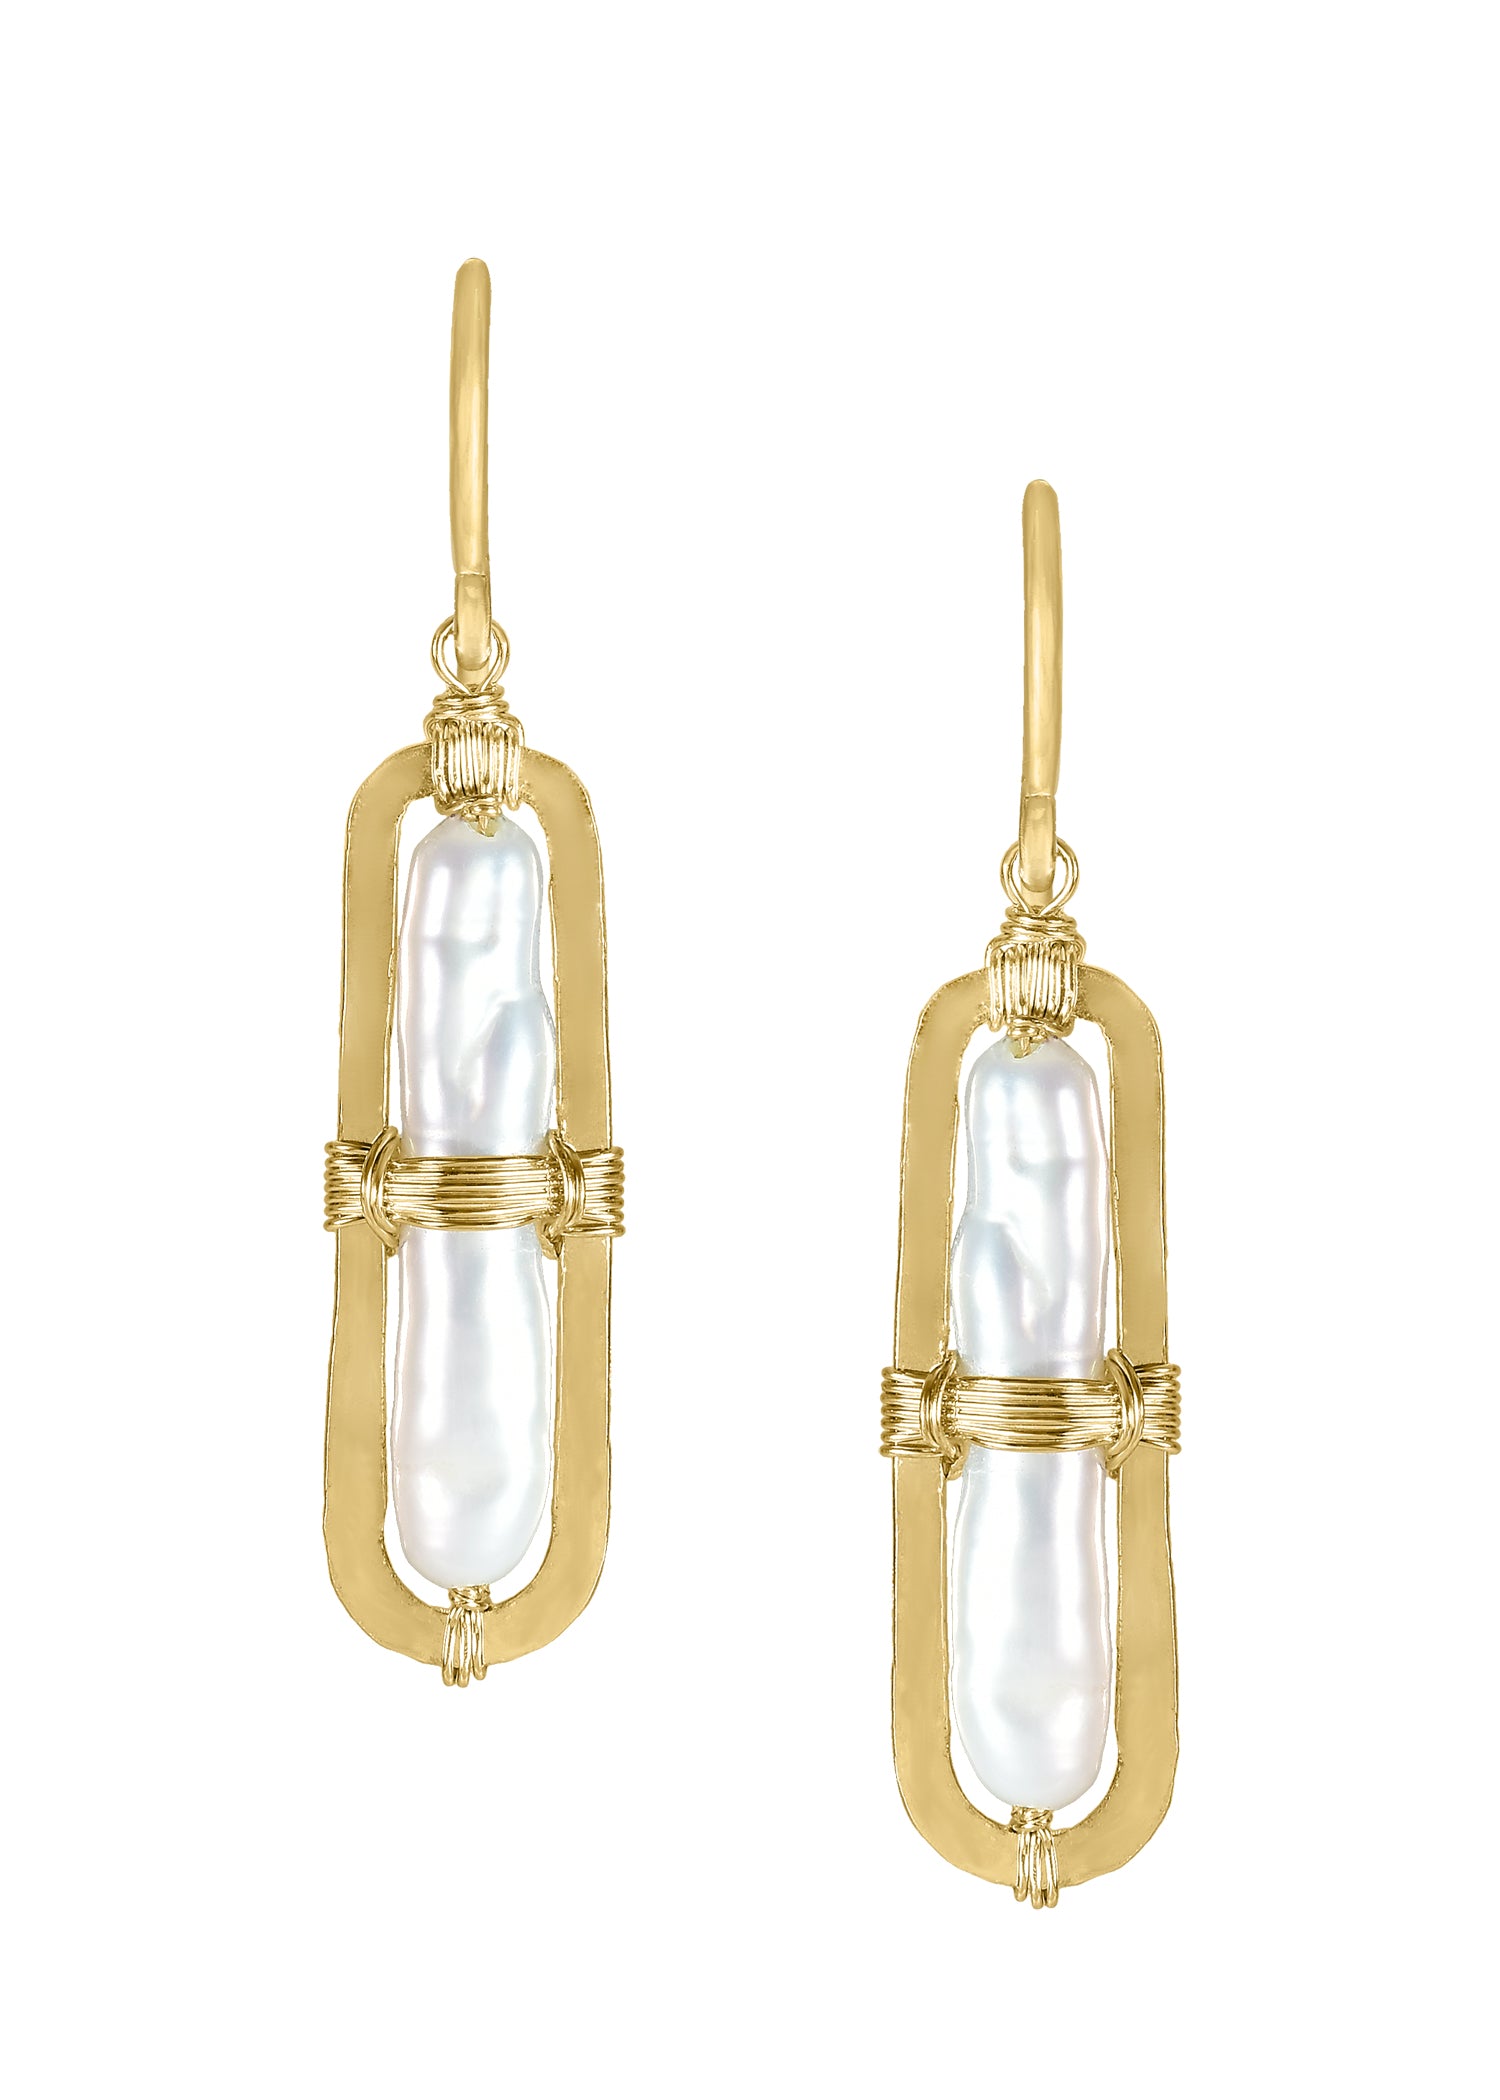 Freshwater pearl 14k gold fill Earrings measure 1-3/8" in length (including the ear wires) and 5/16" in width Handmade in our Los Angeles studio